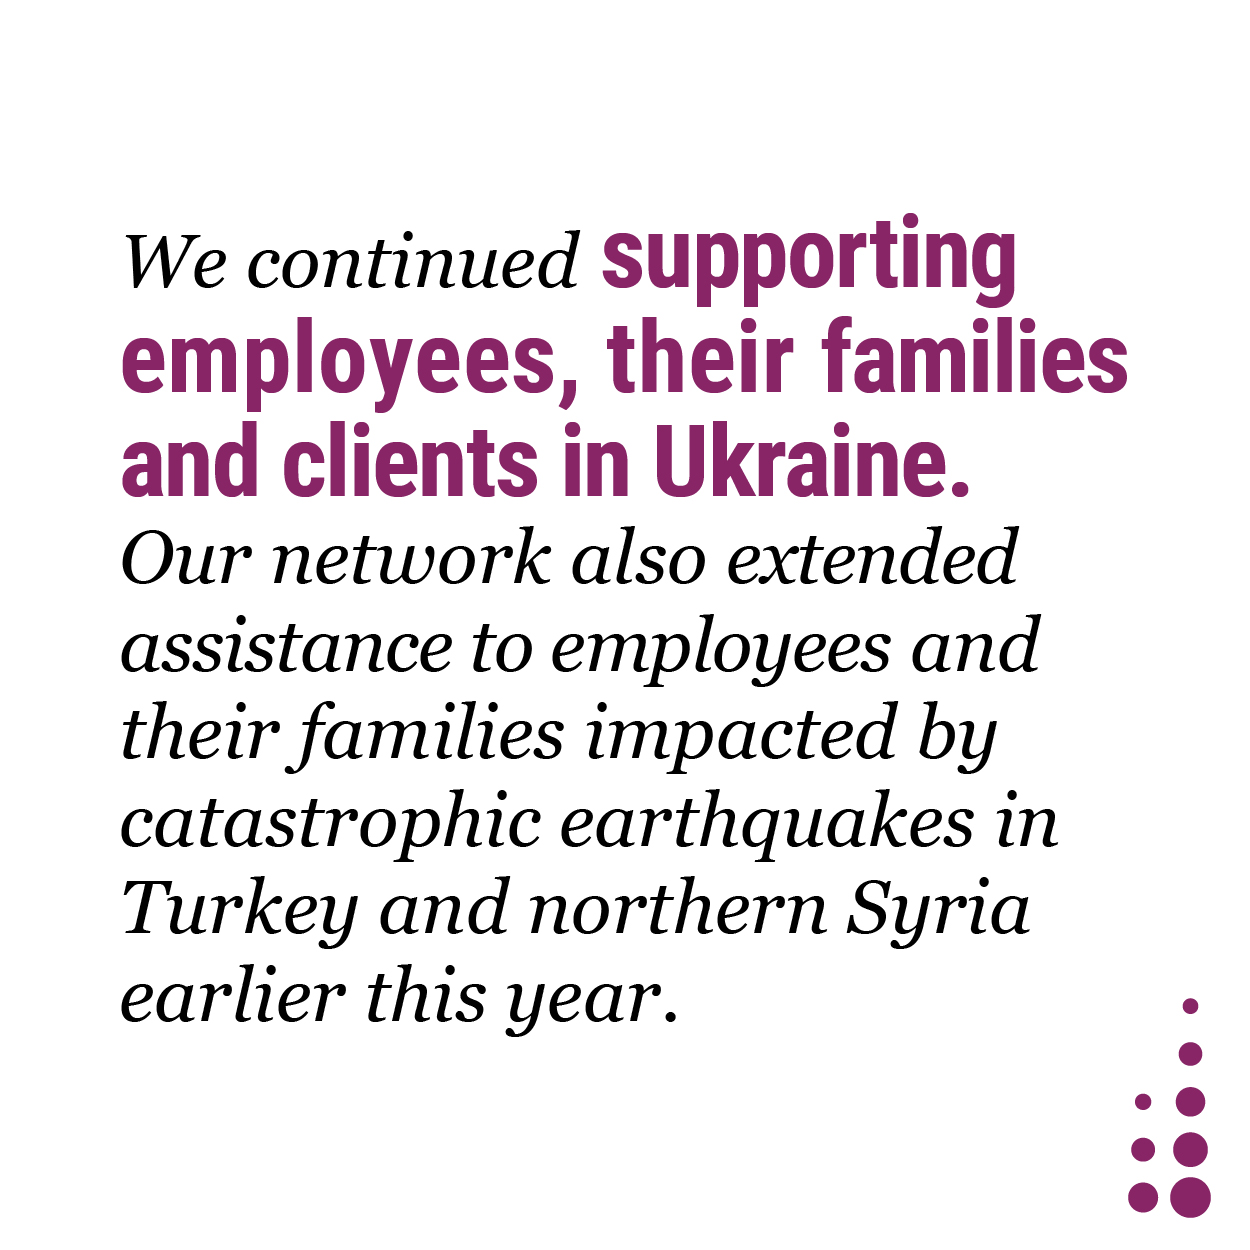 We continued supporting employees, their families and clients in Ukraine. Our network also extended assistance to employees and their families impacted by catastrophic earthquakes in Turkey and northern Syria earlier this year.